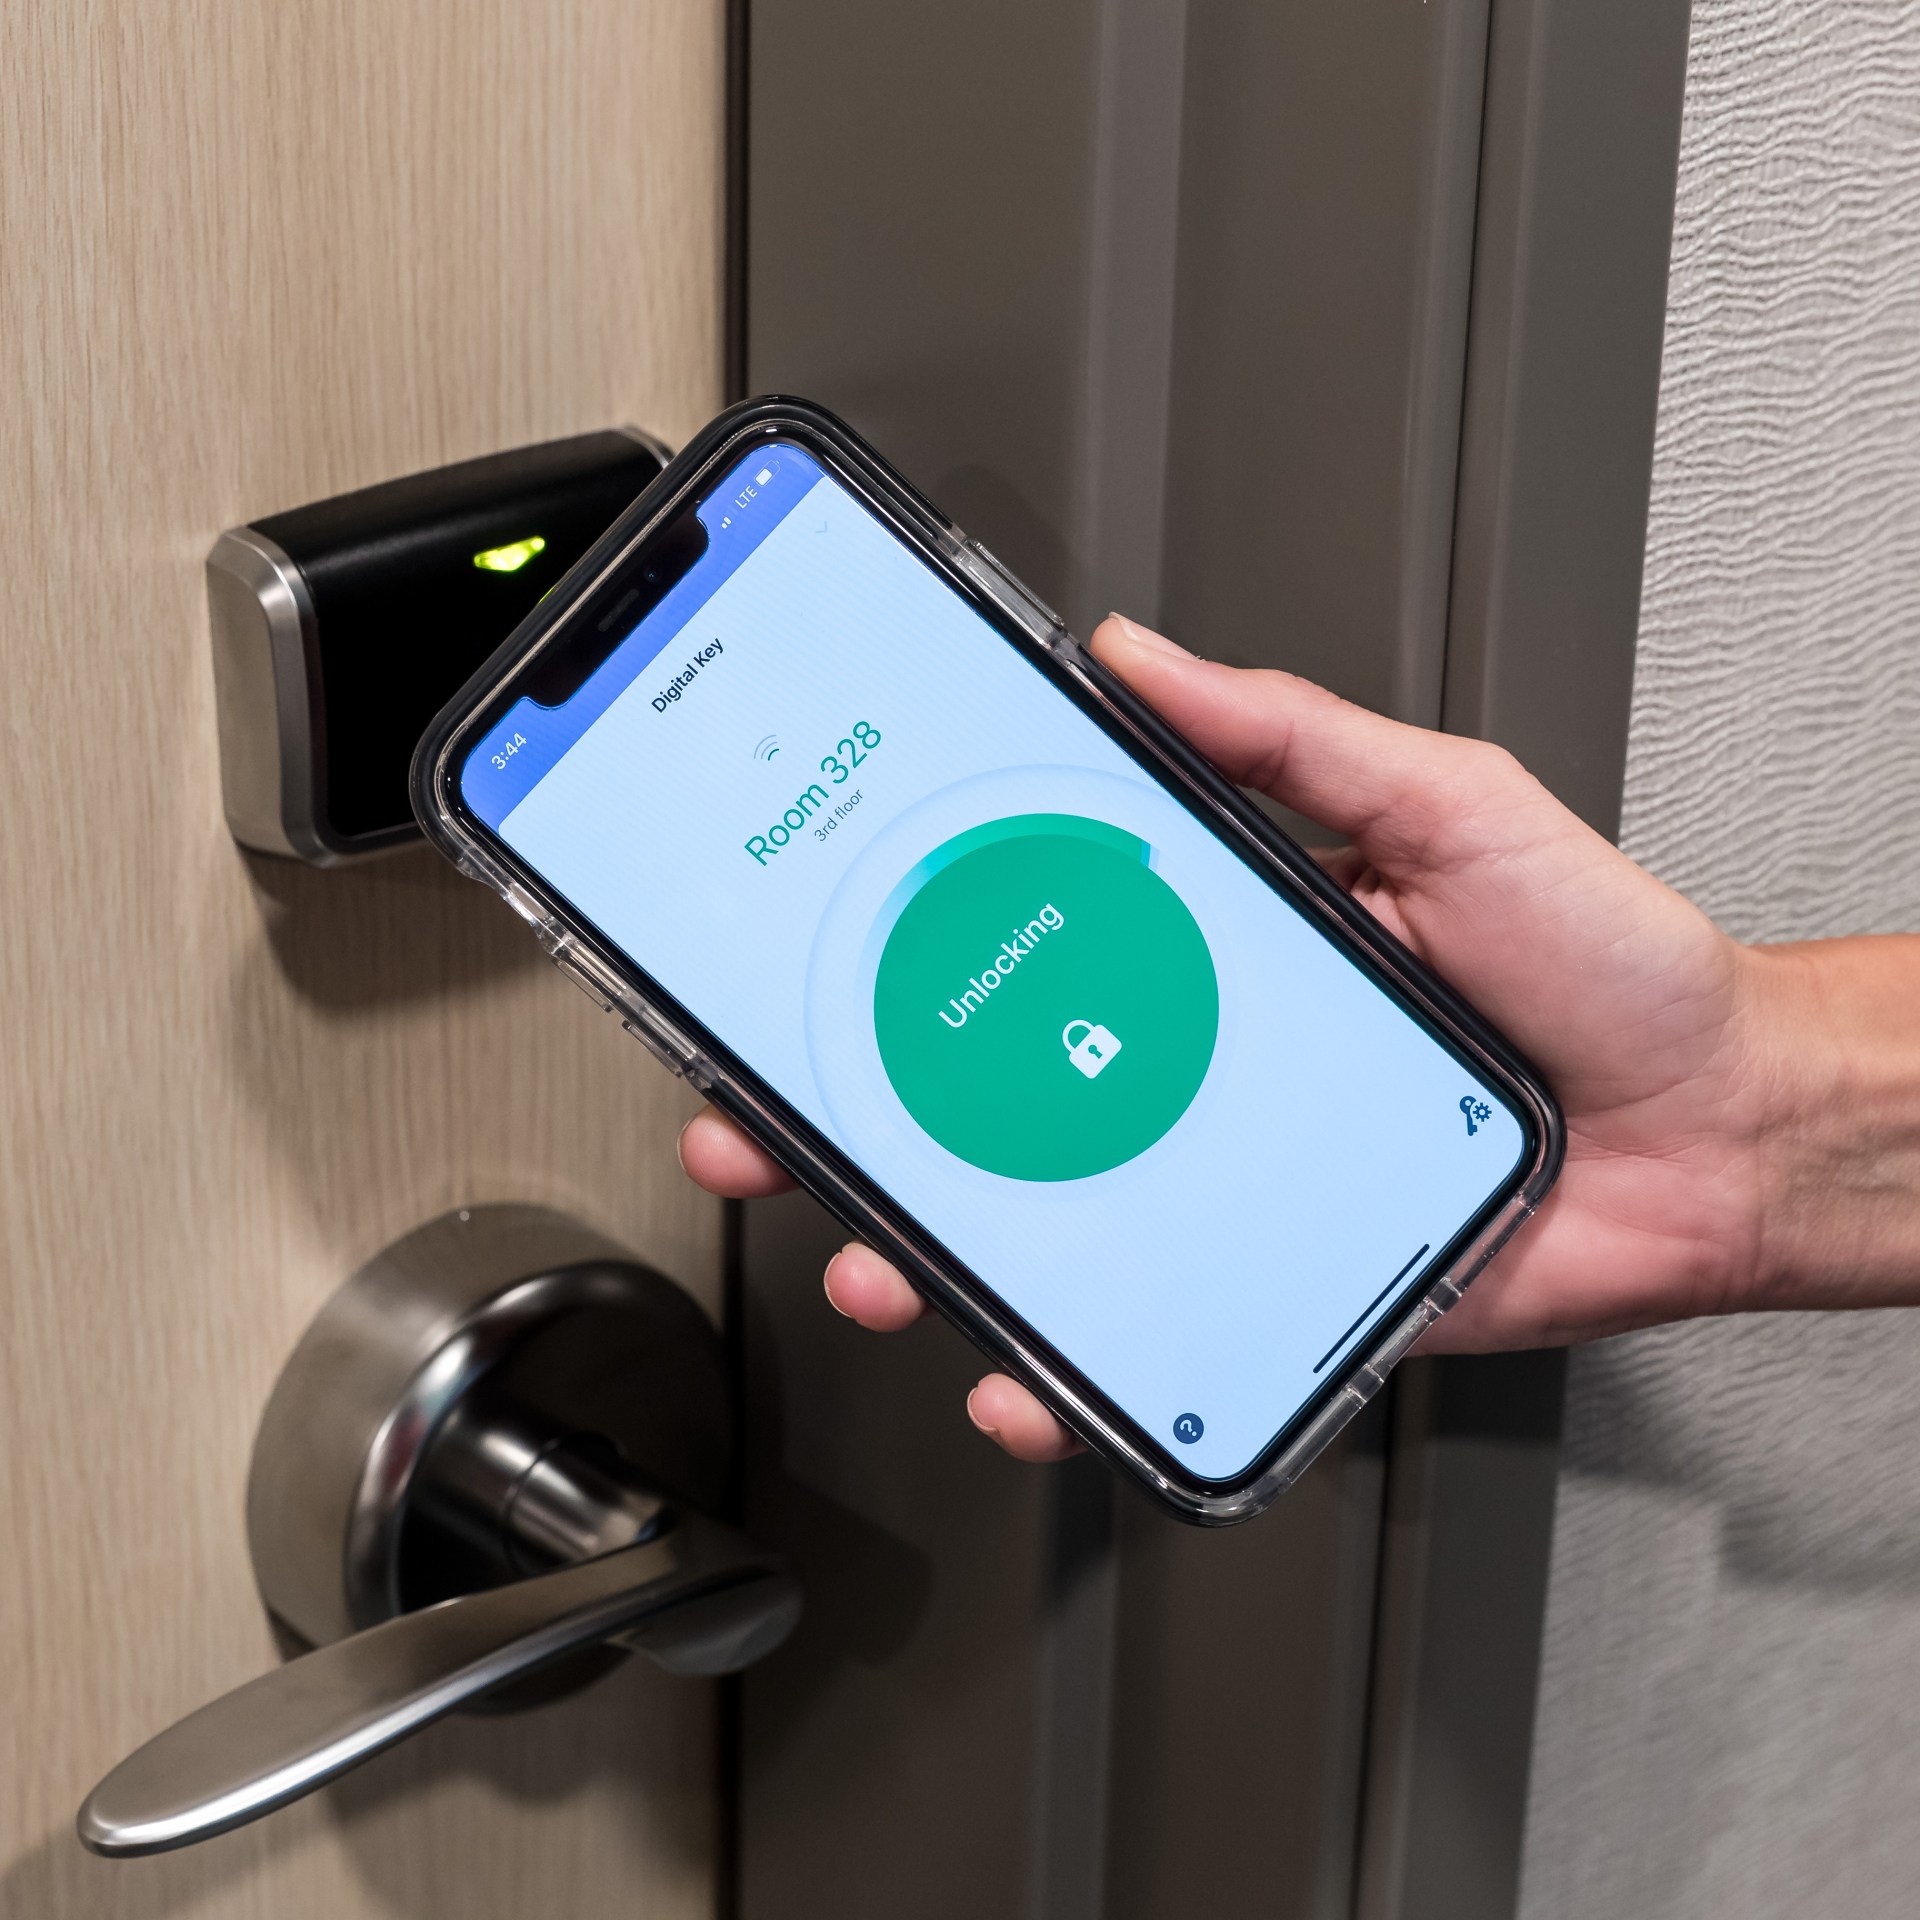 Person holding a phone with Hilton Digital Key activated and opening a hotel room door